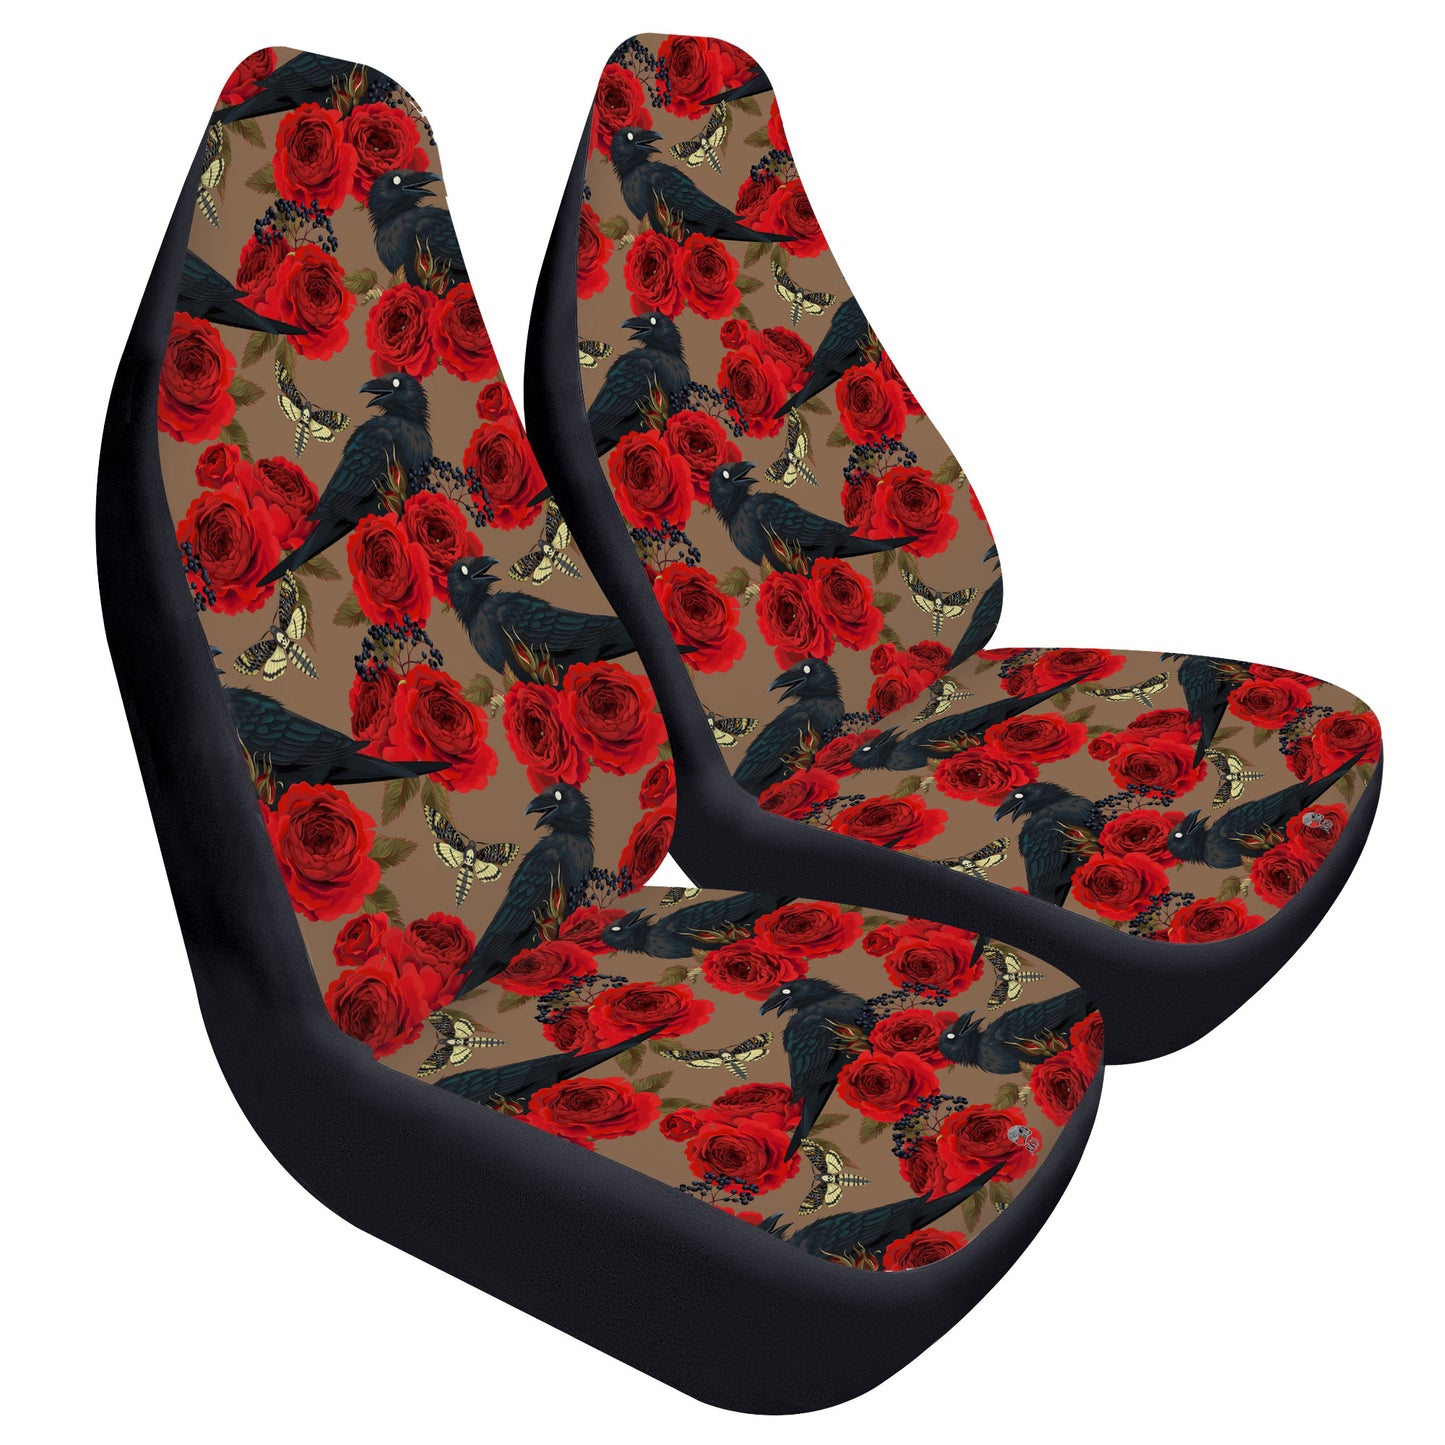 Raven and Roses Nevermore Car Seat Covers